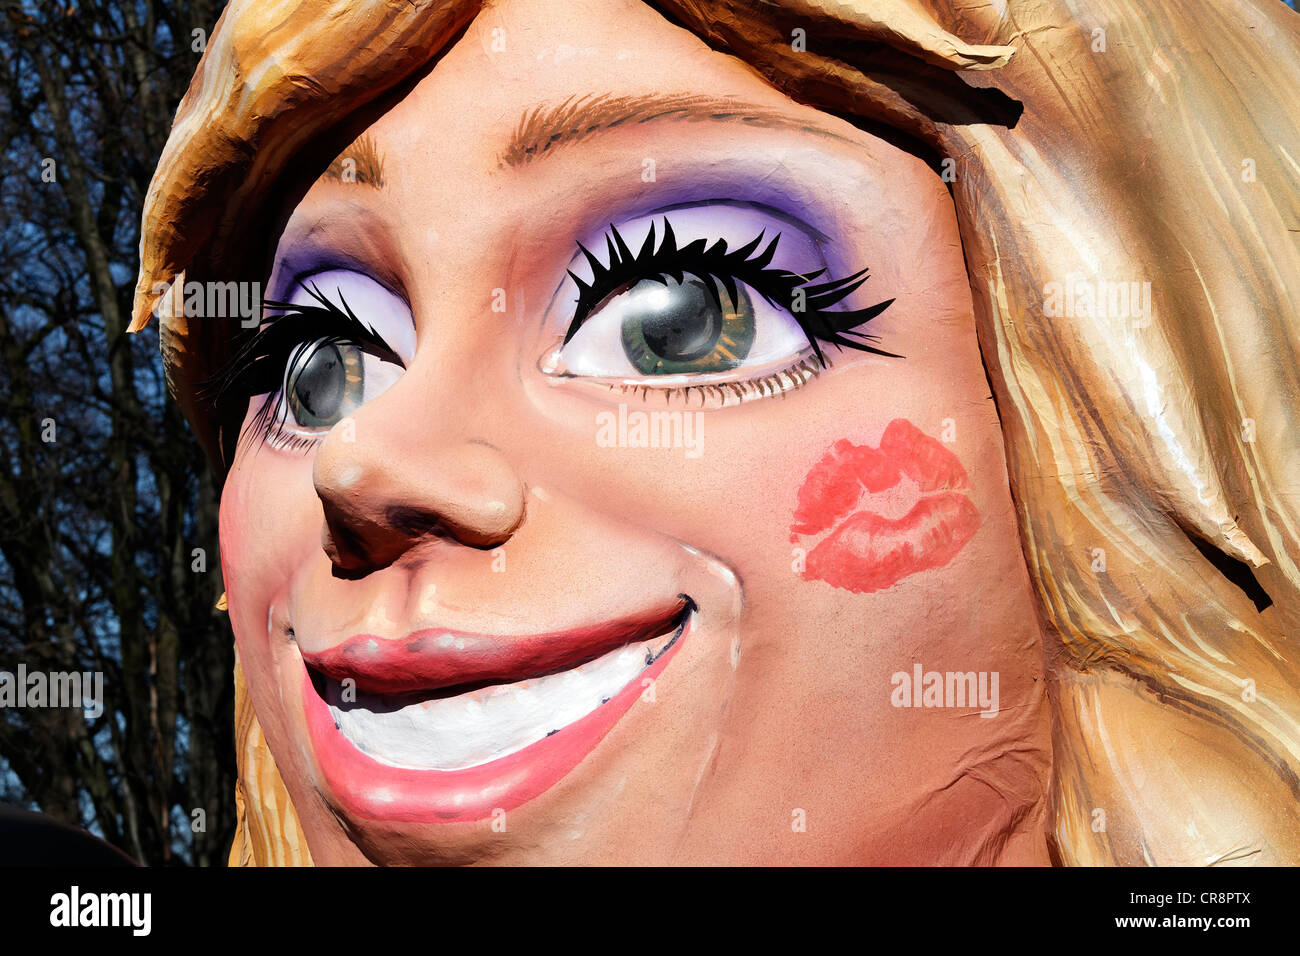 Radiant face of a blond woman with a lipstick imprint on her cheek, paper-mache figure, parade float at the Rosenmontagszug Stock Photo